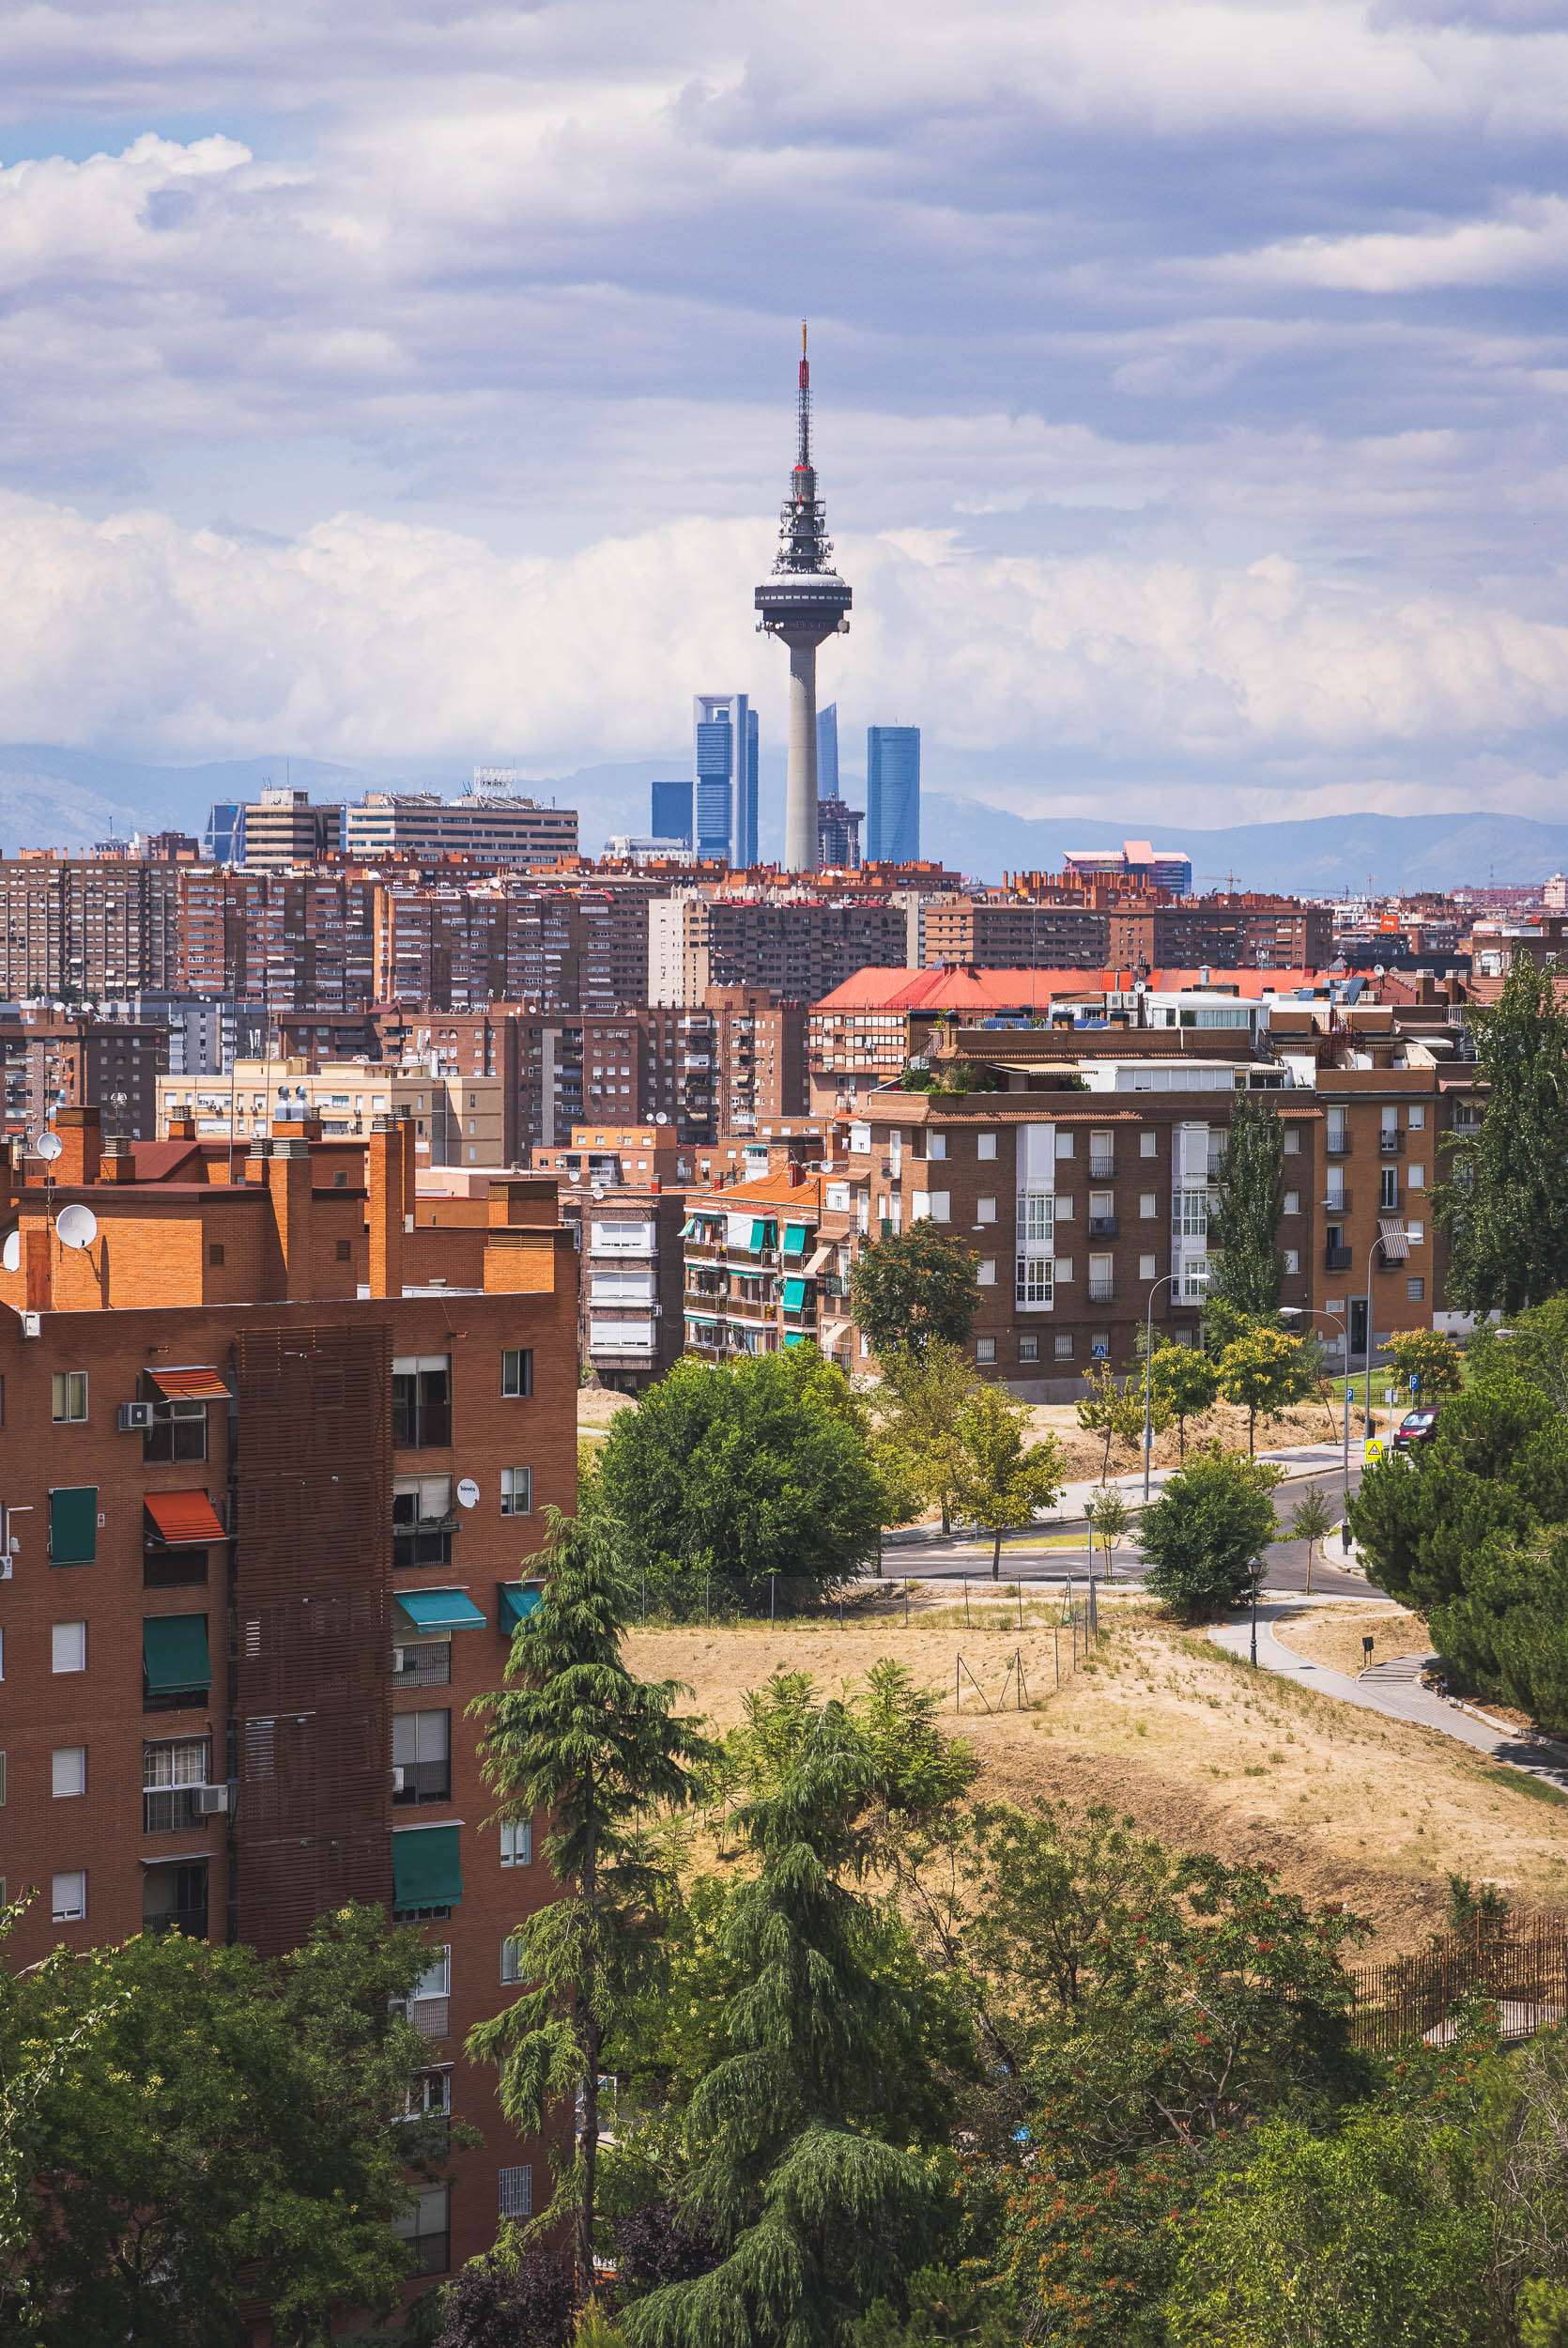 A photo of the Madrid skyline featuring apartment buildings in the foreground and tall towers on the horizon